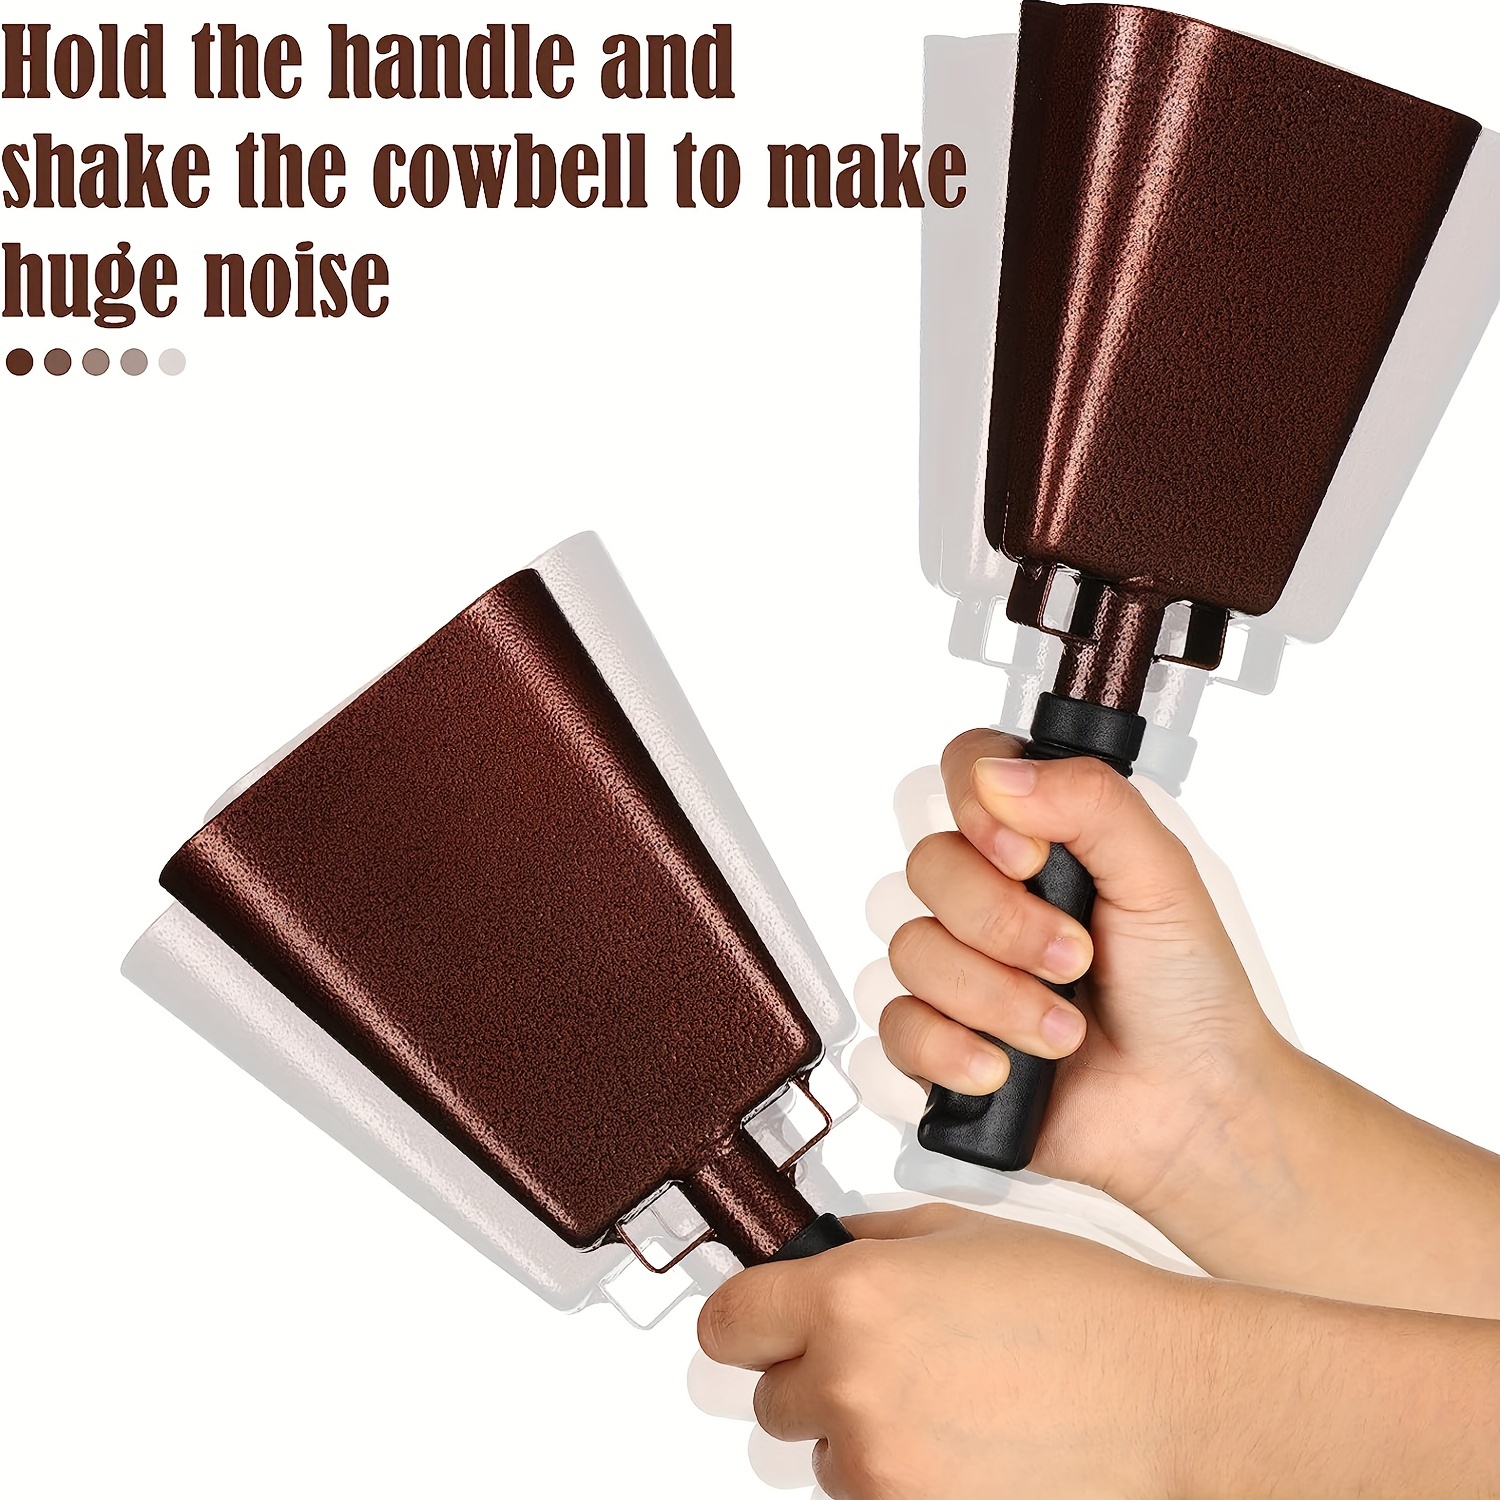 6 Pcs Metal Cowbells With Handle, Loud Cow Bells Noise Makers For